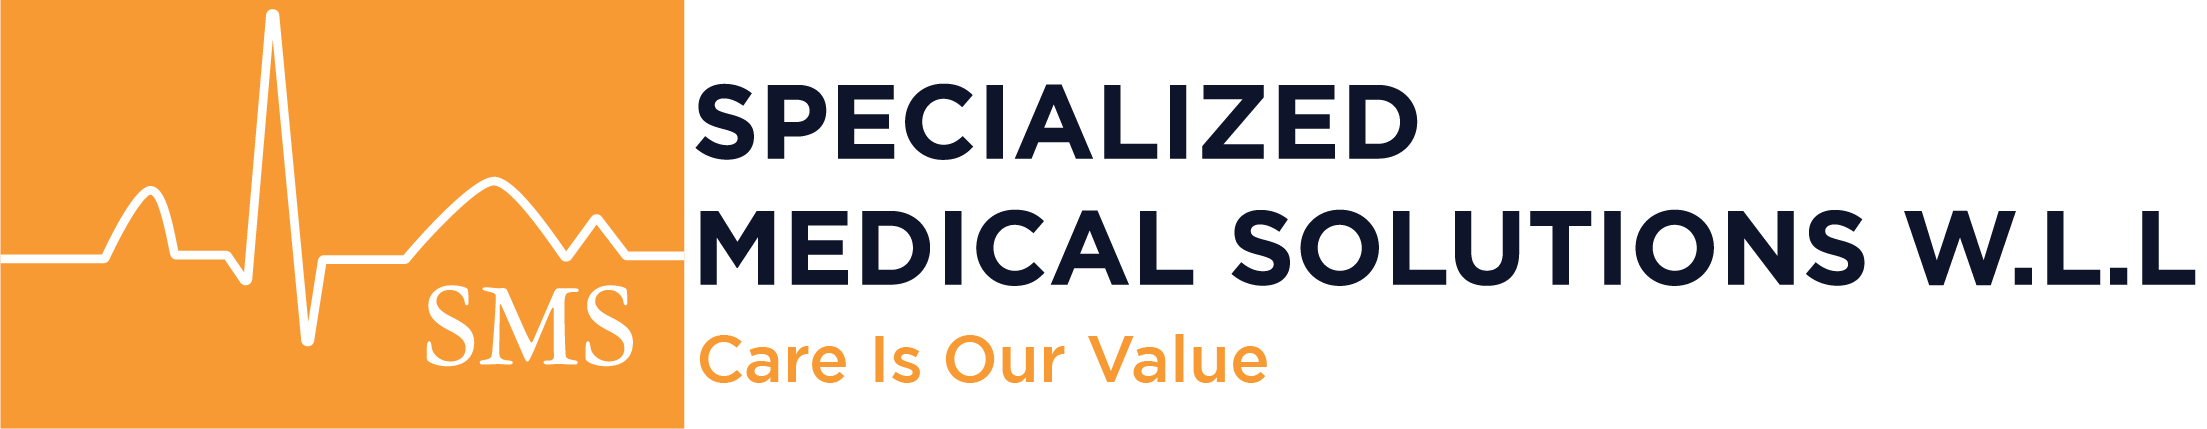 Specialized Medical Solutions